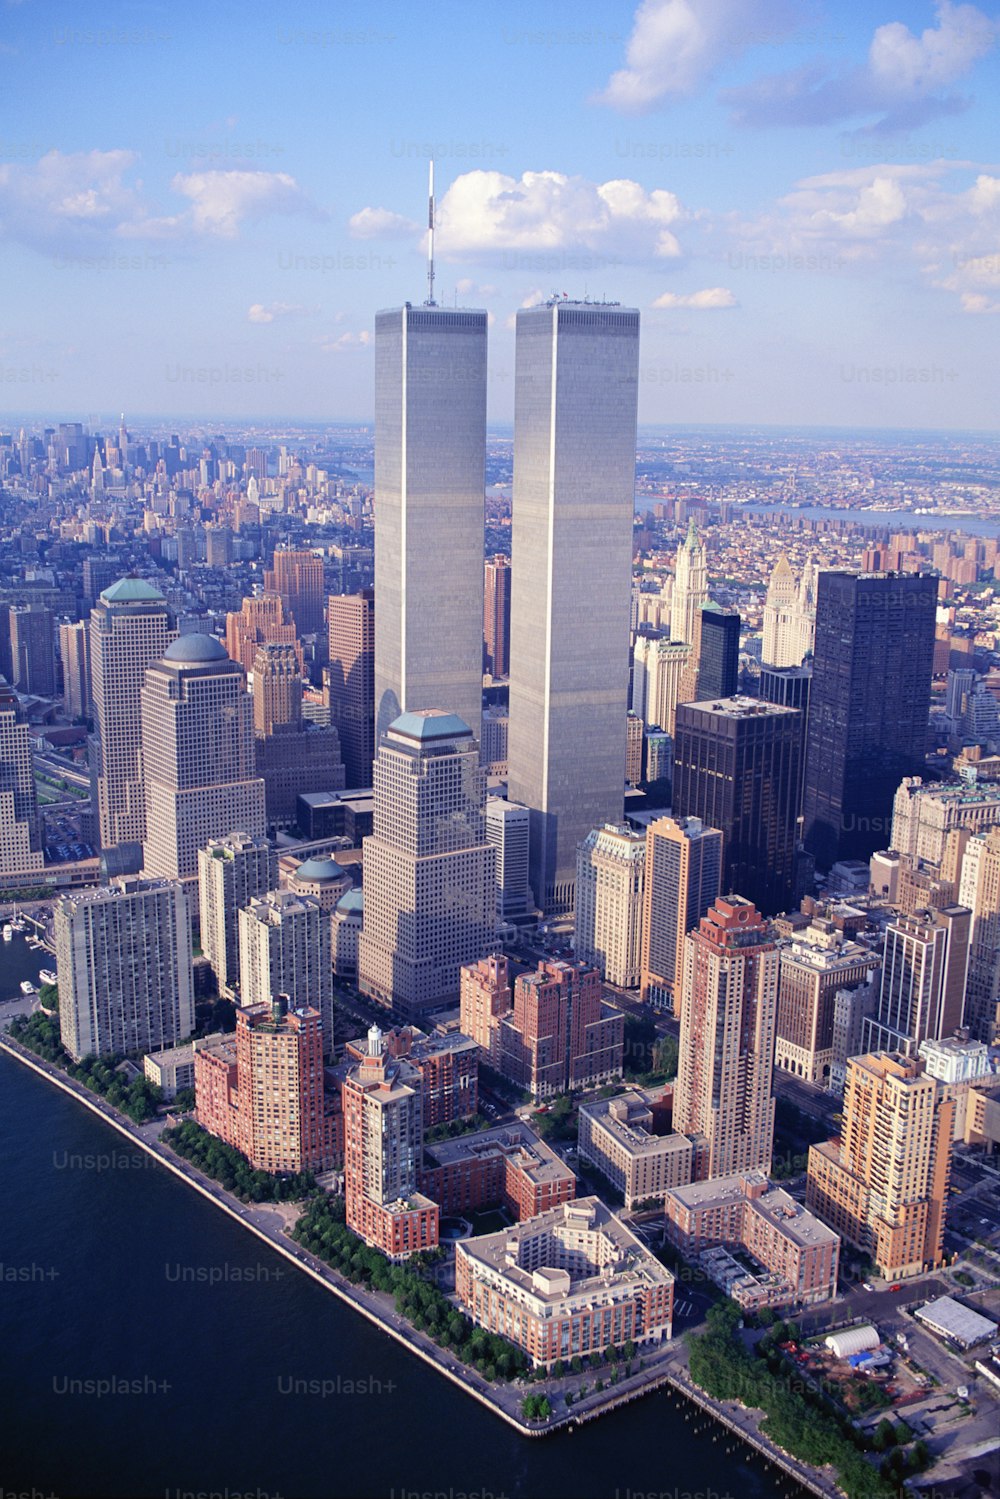 the twin towers of the twin towers are in the middle of the city